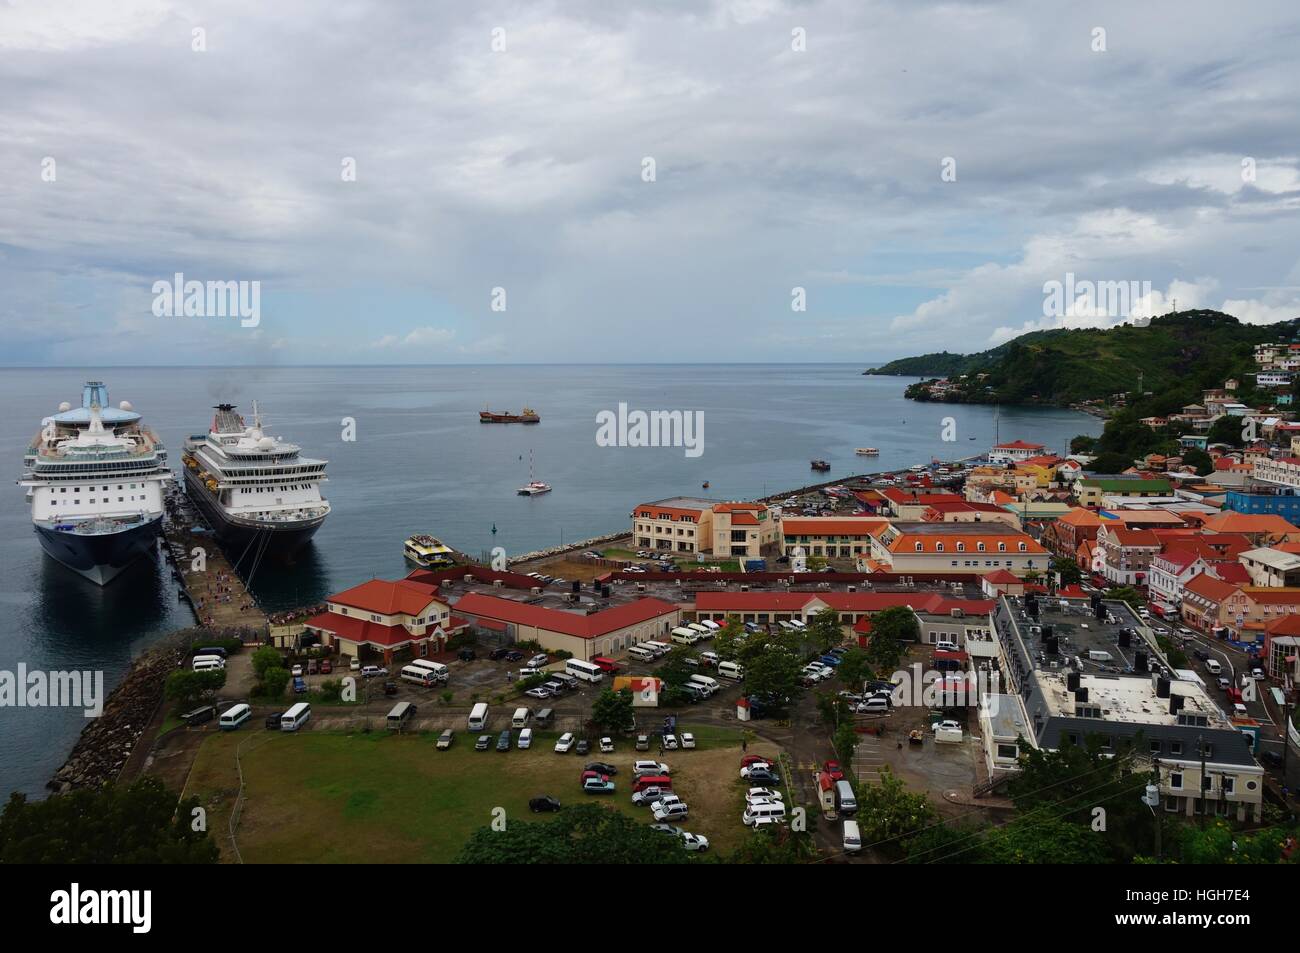 Large cruise ship in the port of St George's, the capital of the Caribbean island country of Grenada. Stock Photo